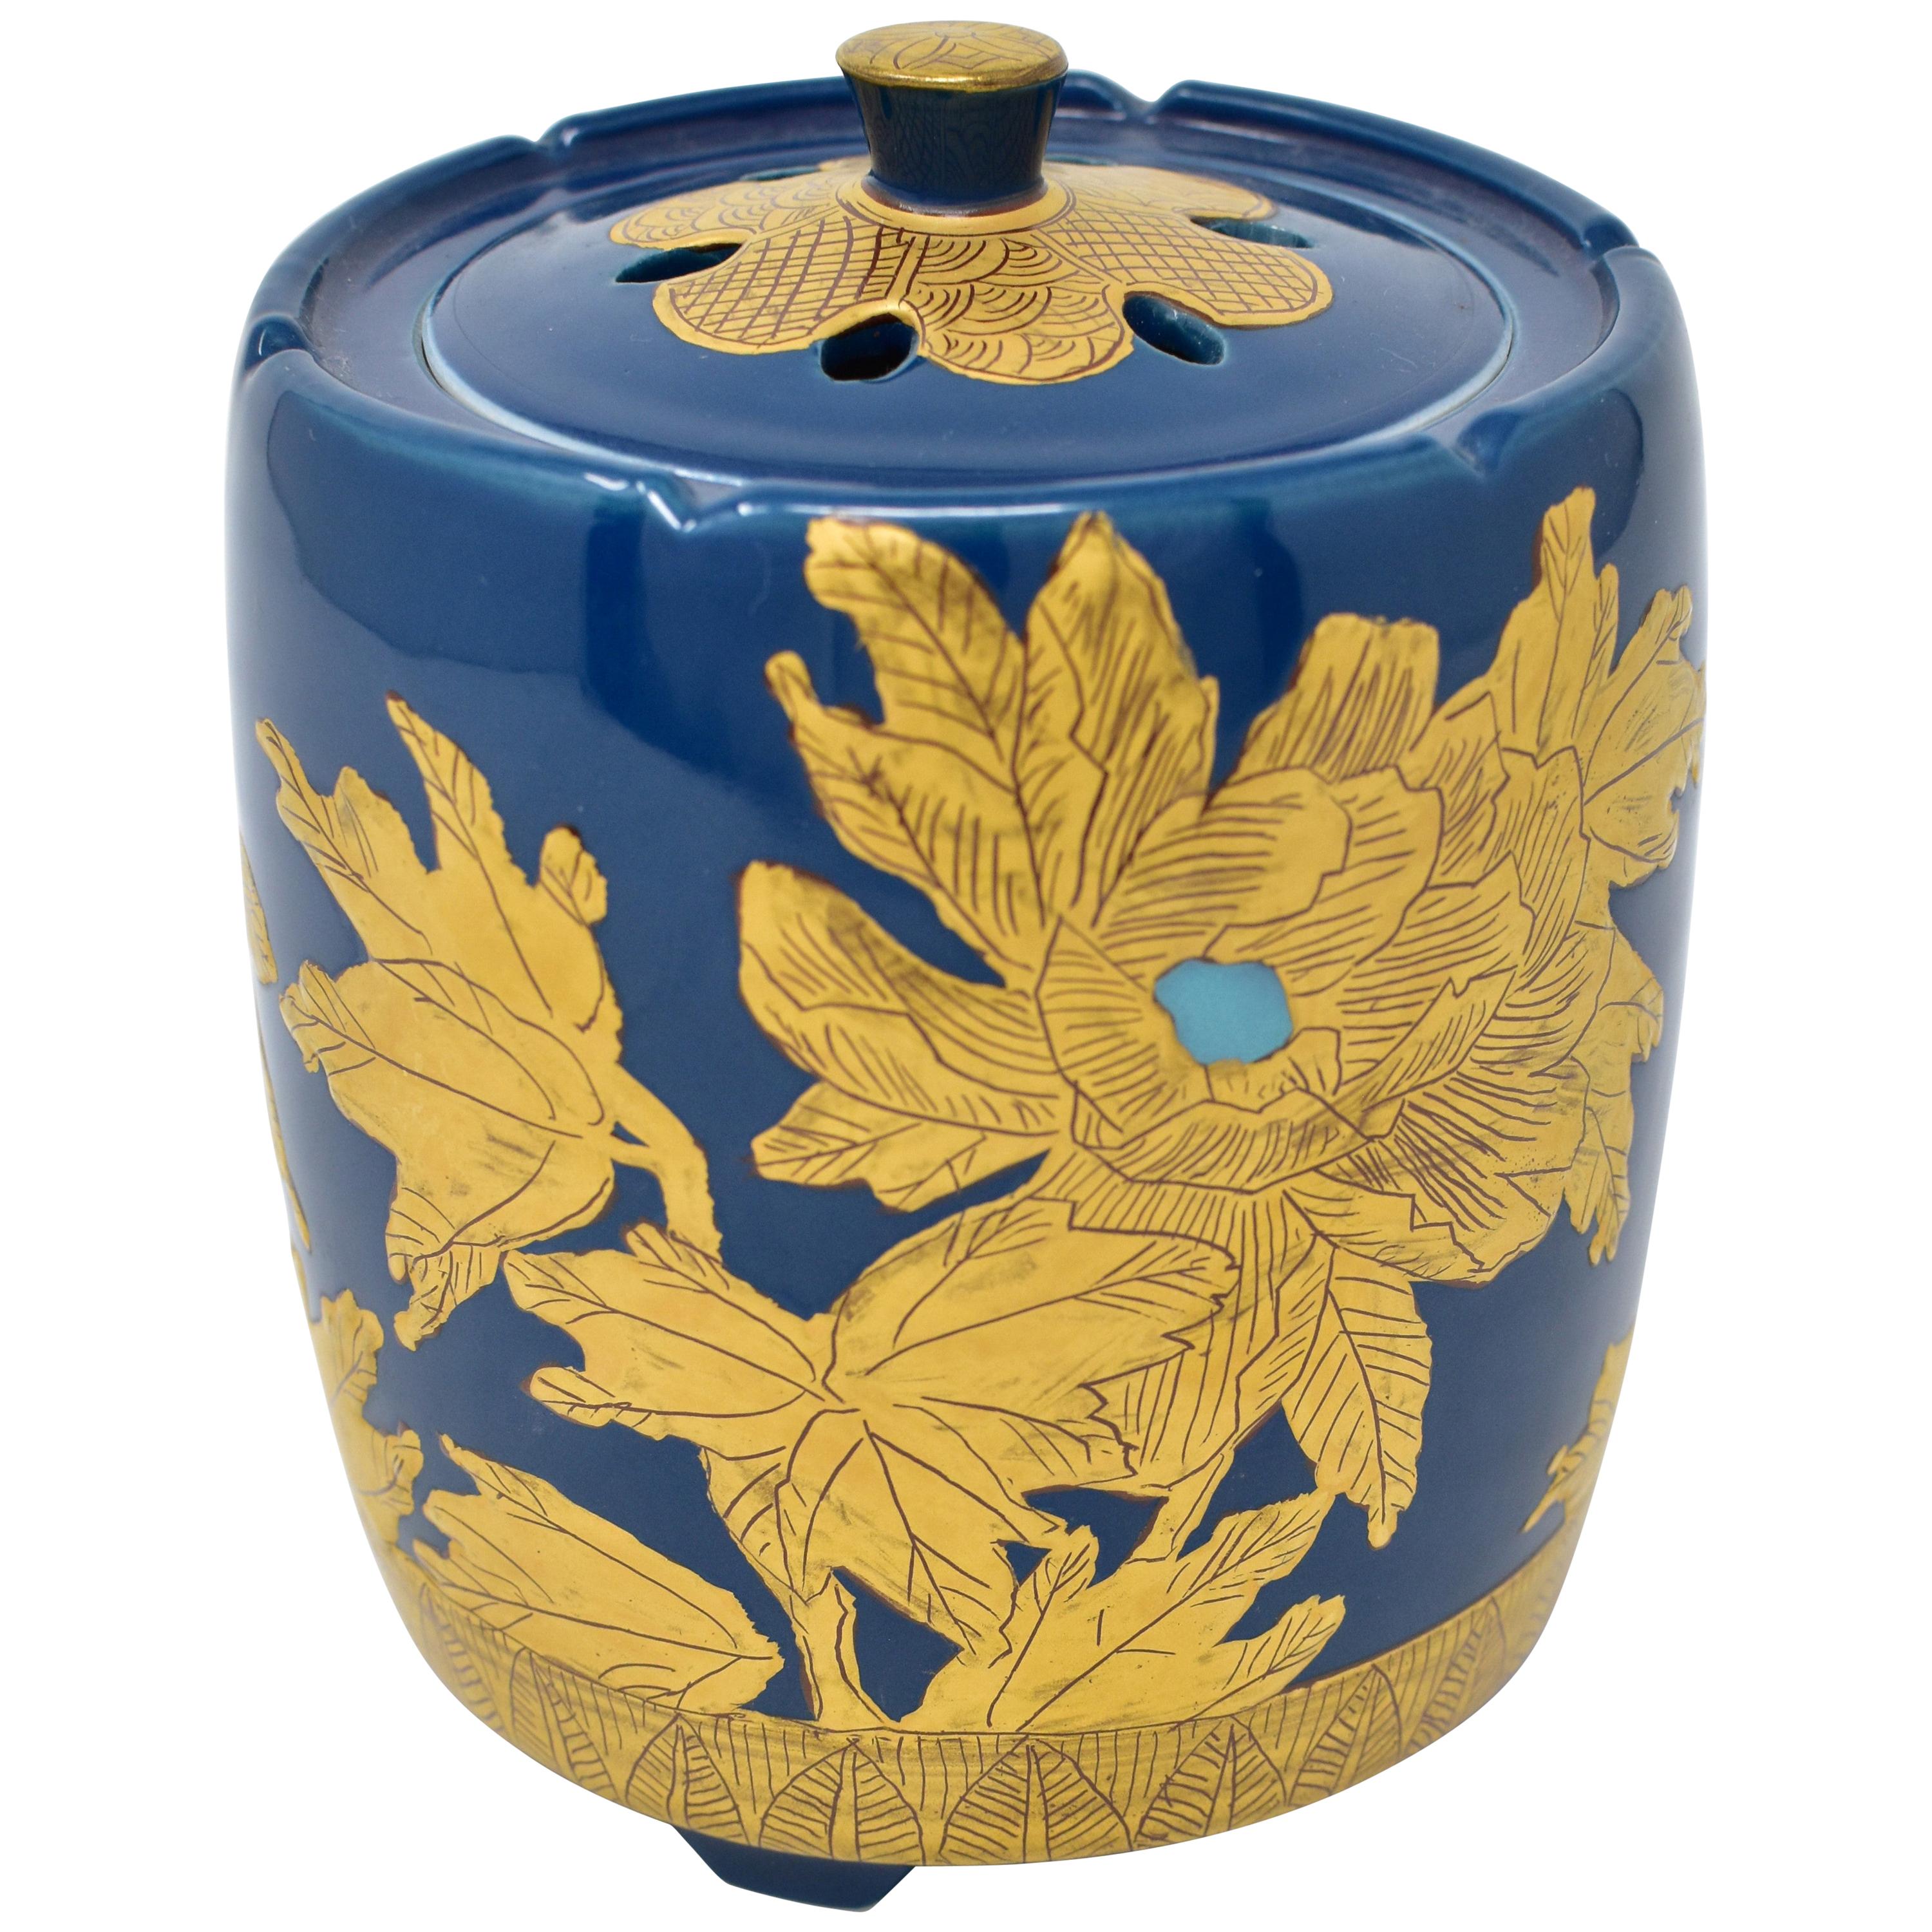 Japanese Contemporary Blue Pure Gold Porcelain Vessel by Master Artist, 2